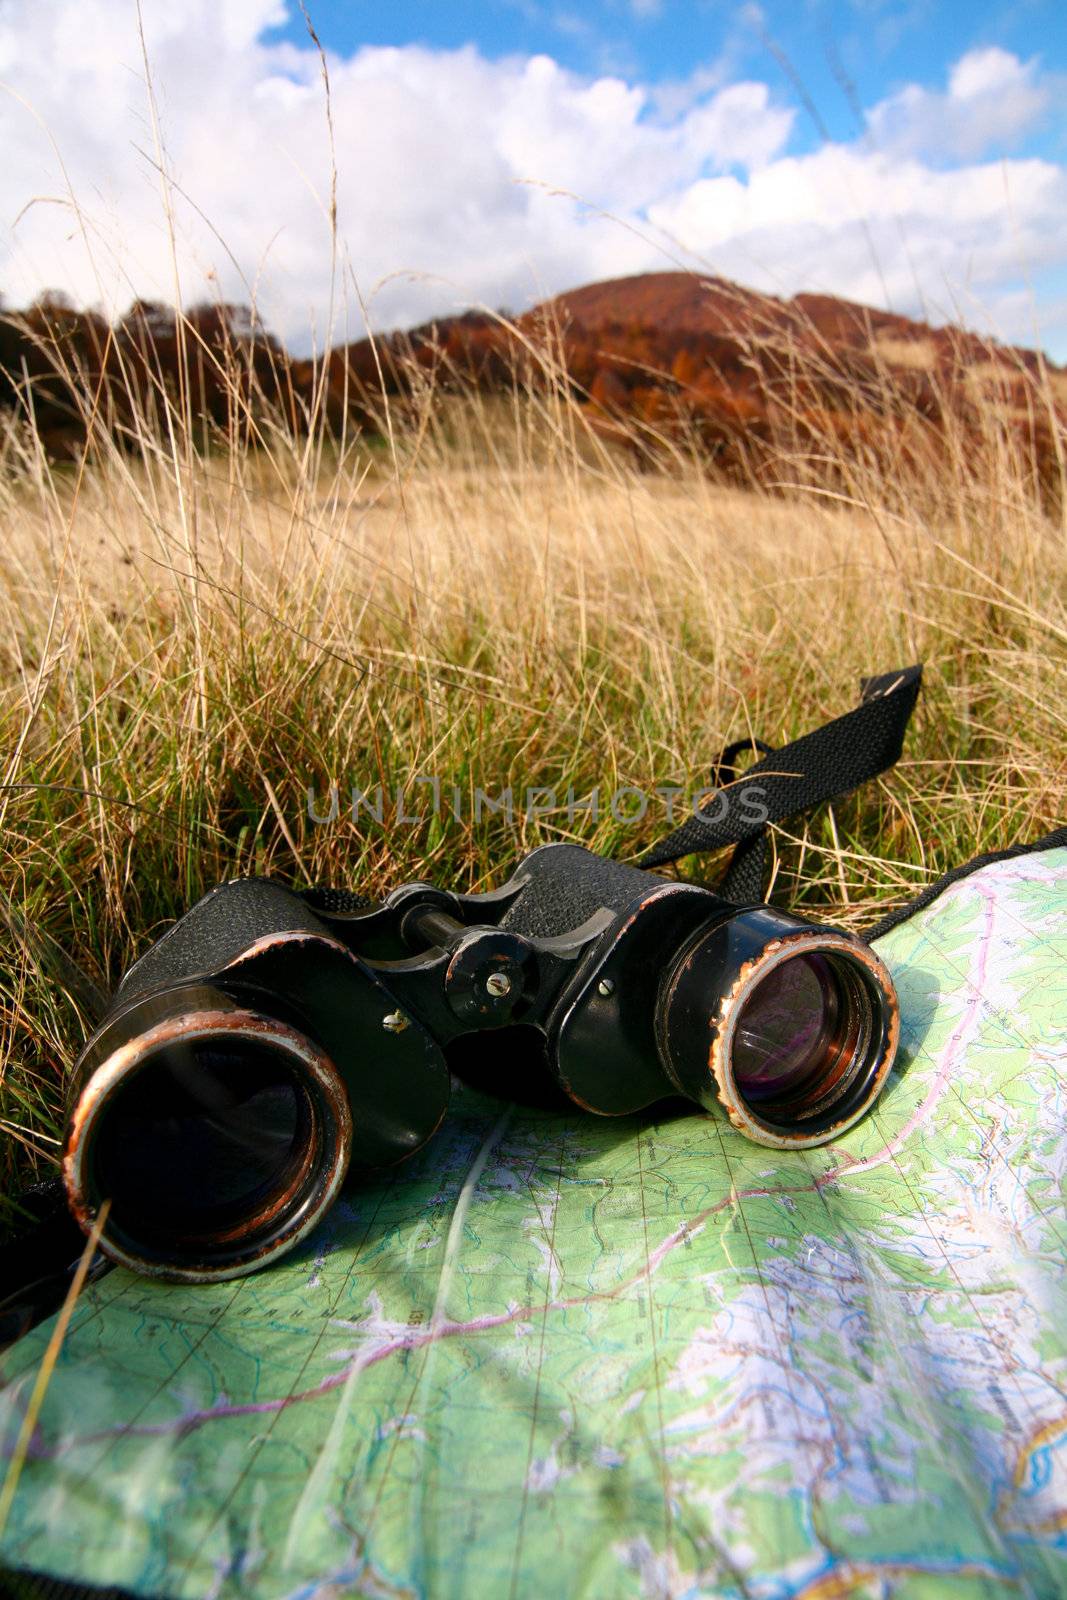 An image of binoculars and map on dry grass